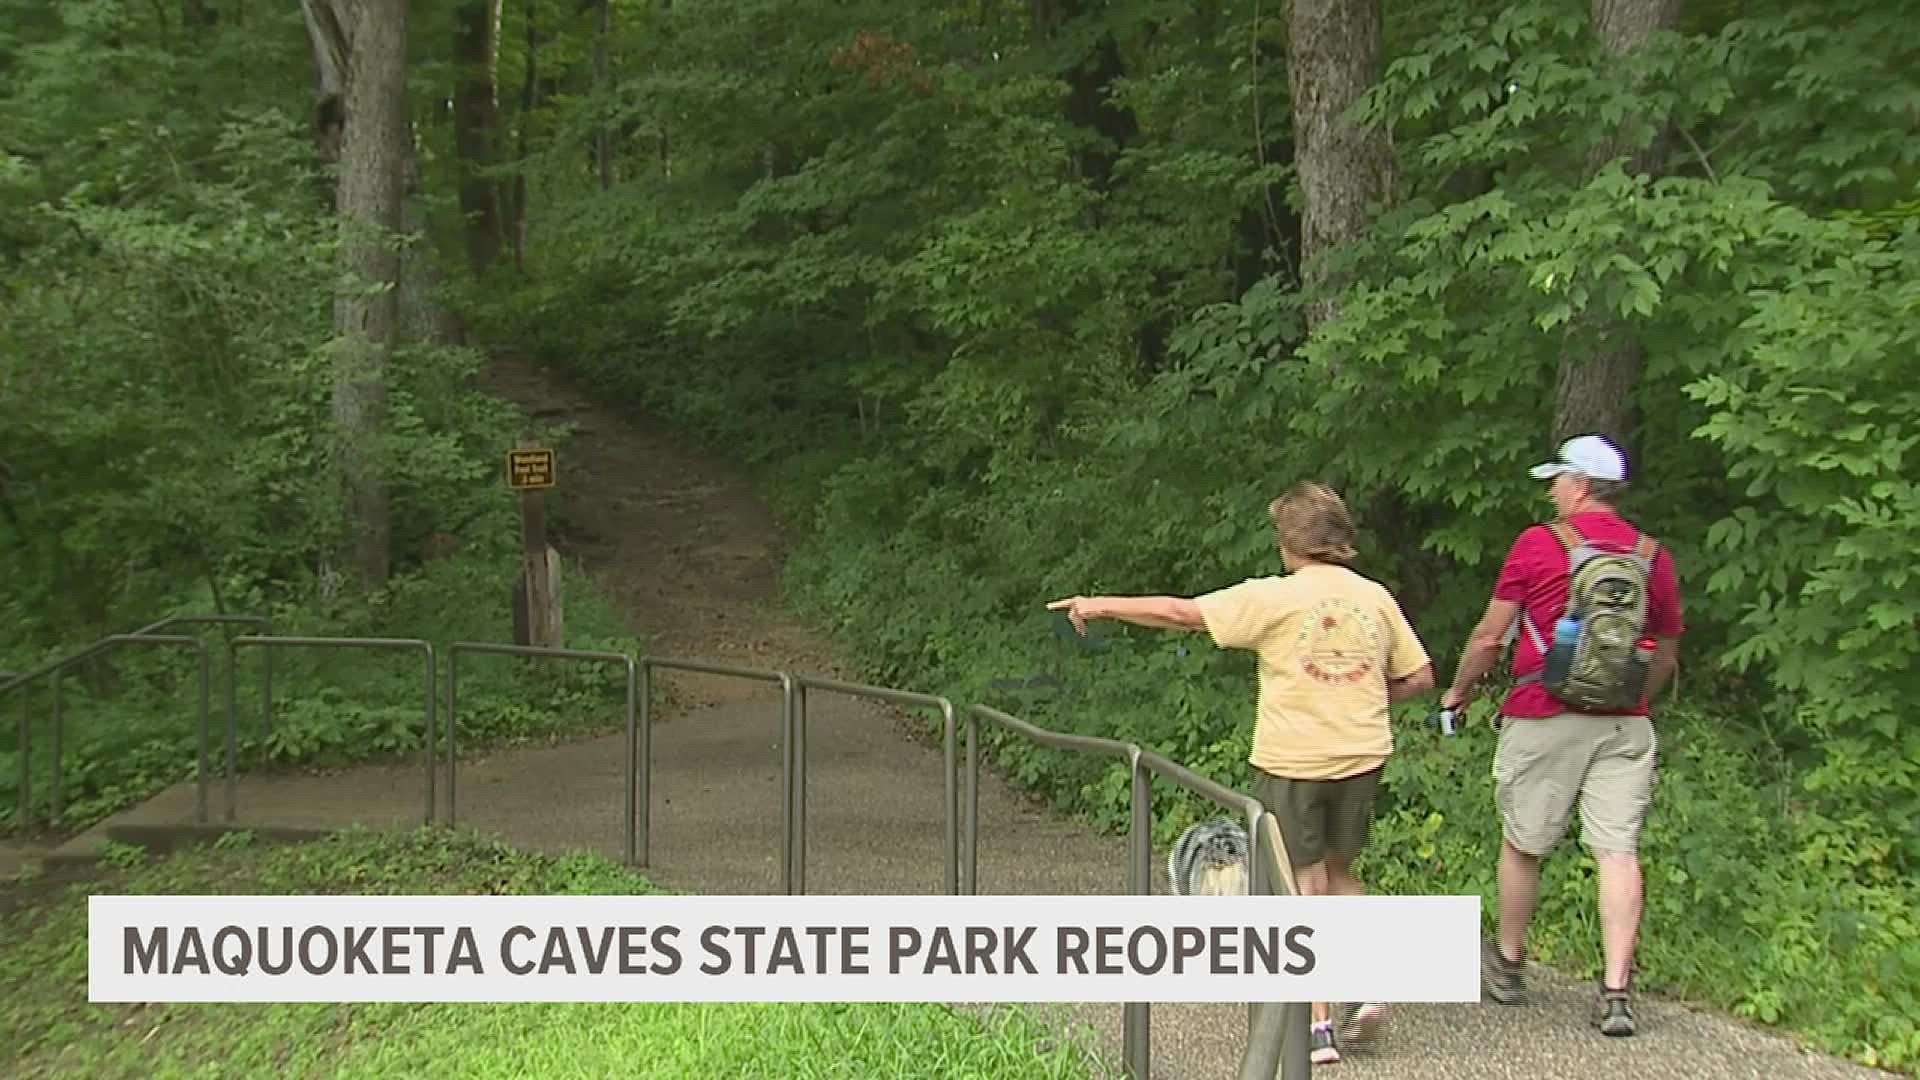 The Iowa state park reopened Thursday morning as the shooting investigation continues at the campground.